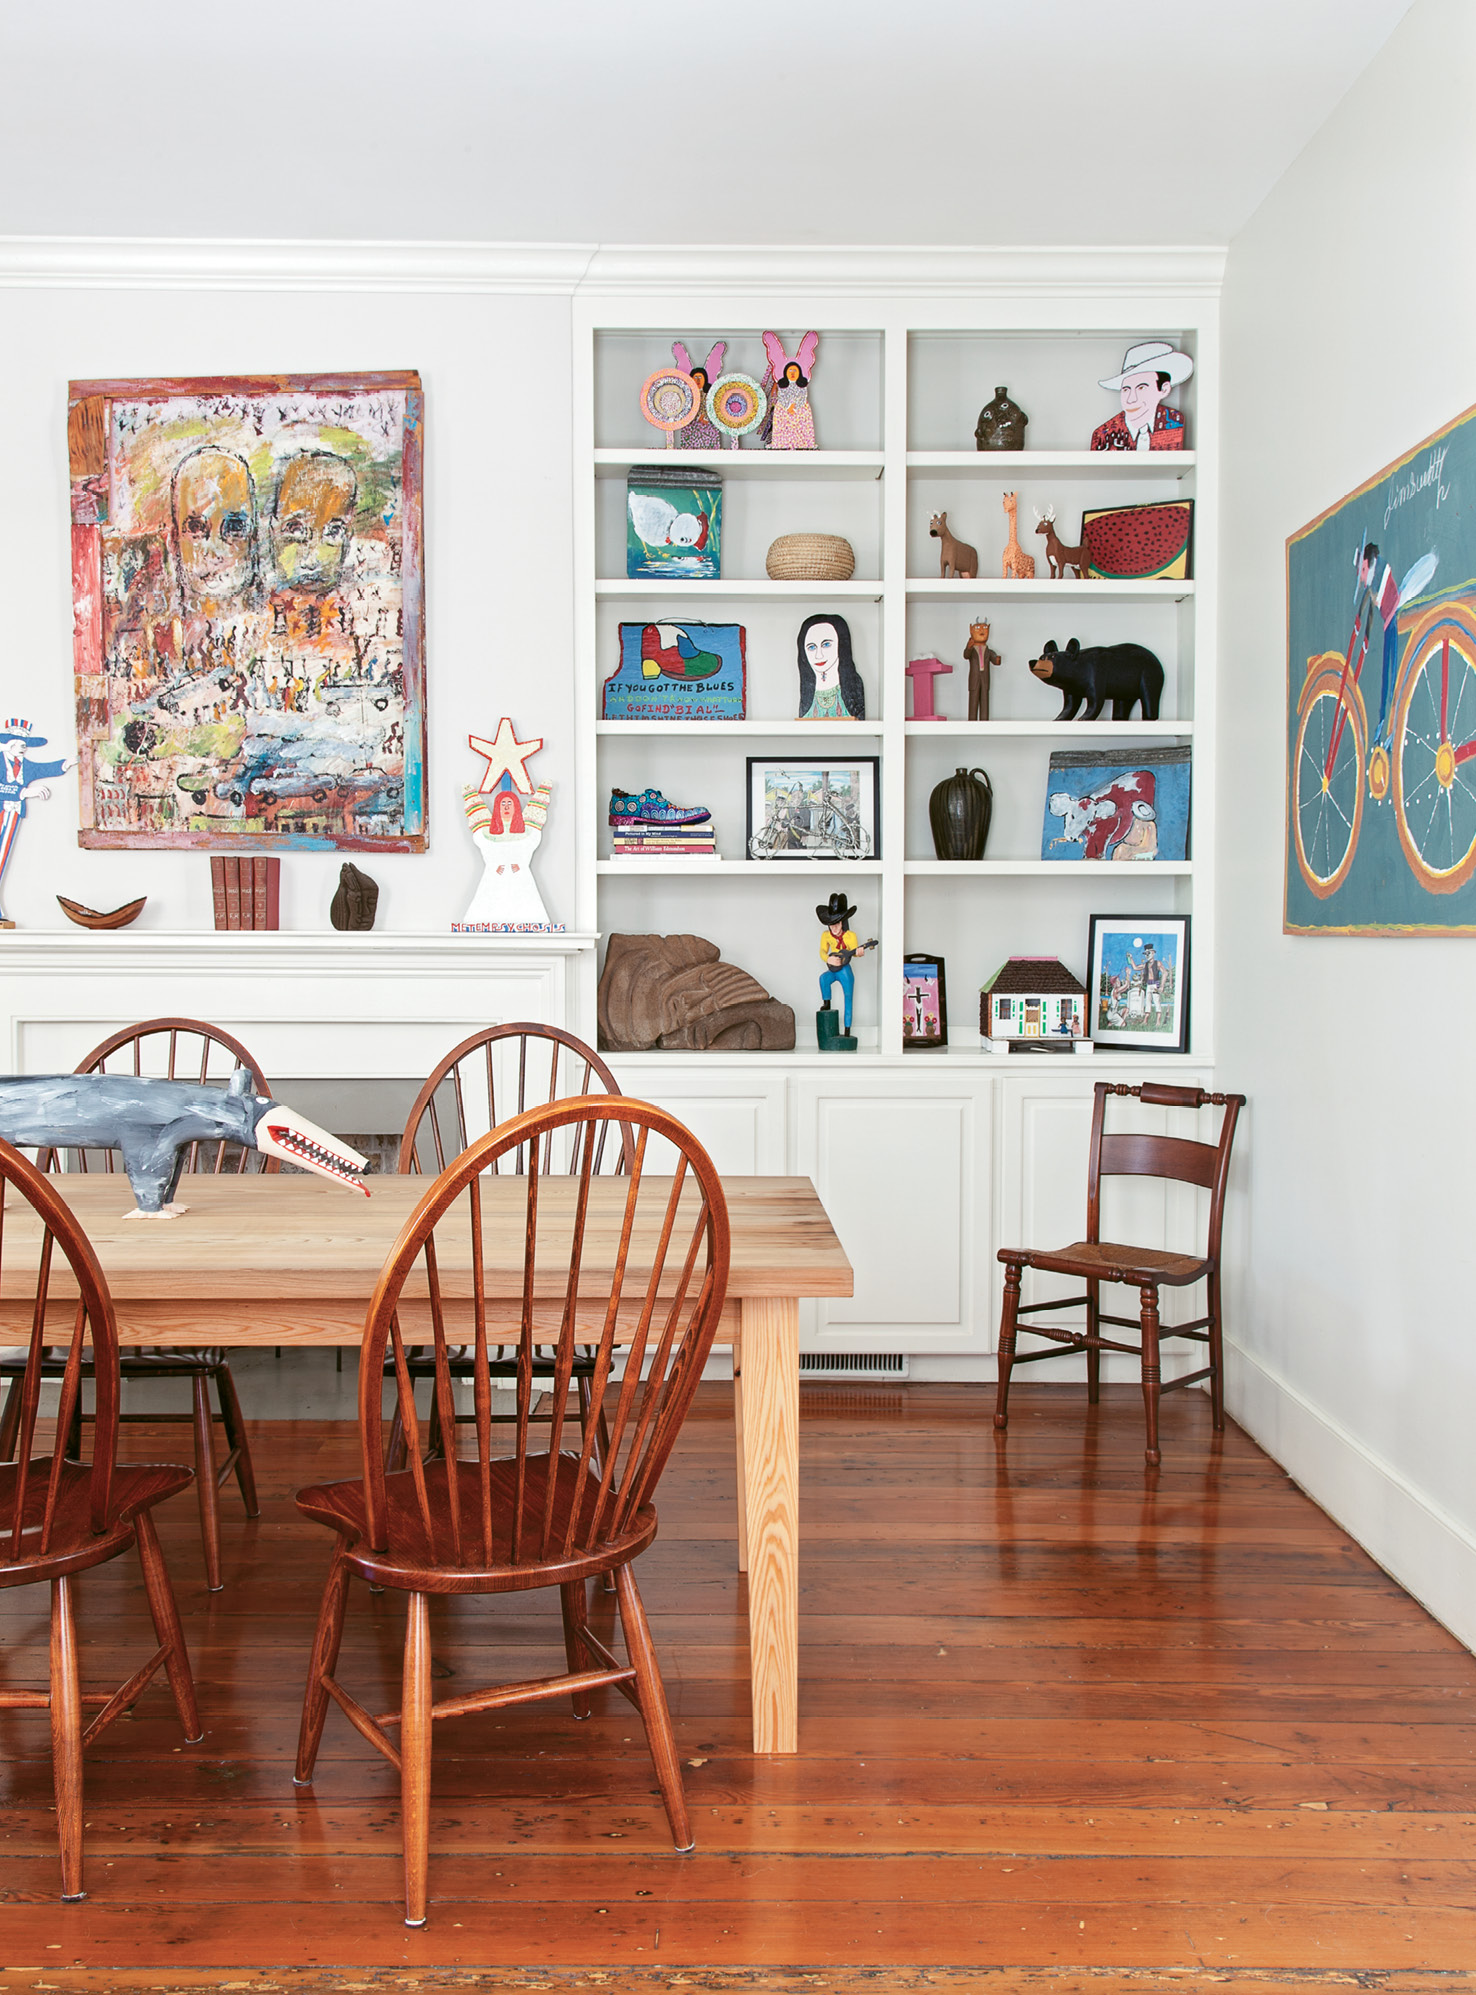 The couple’s folk-art collection could fill a museum.